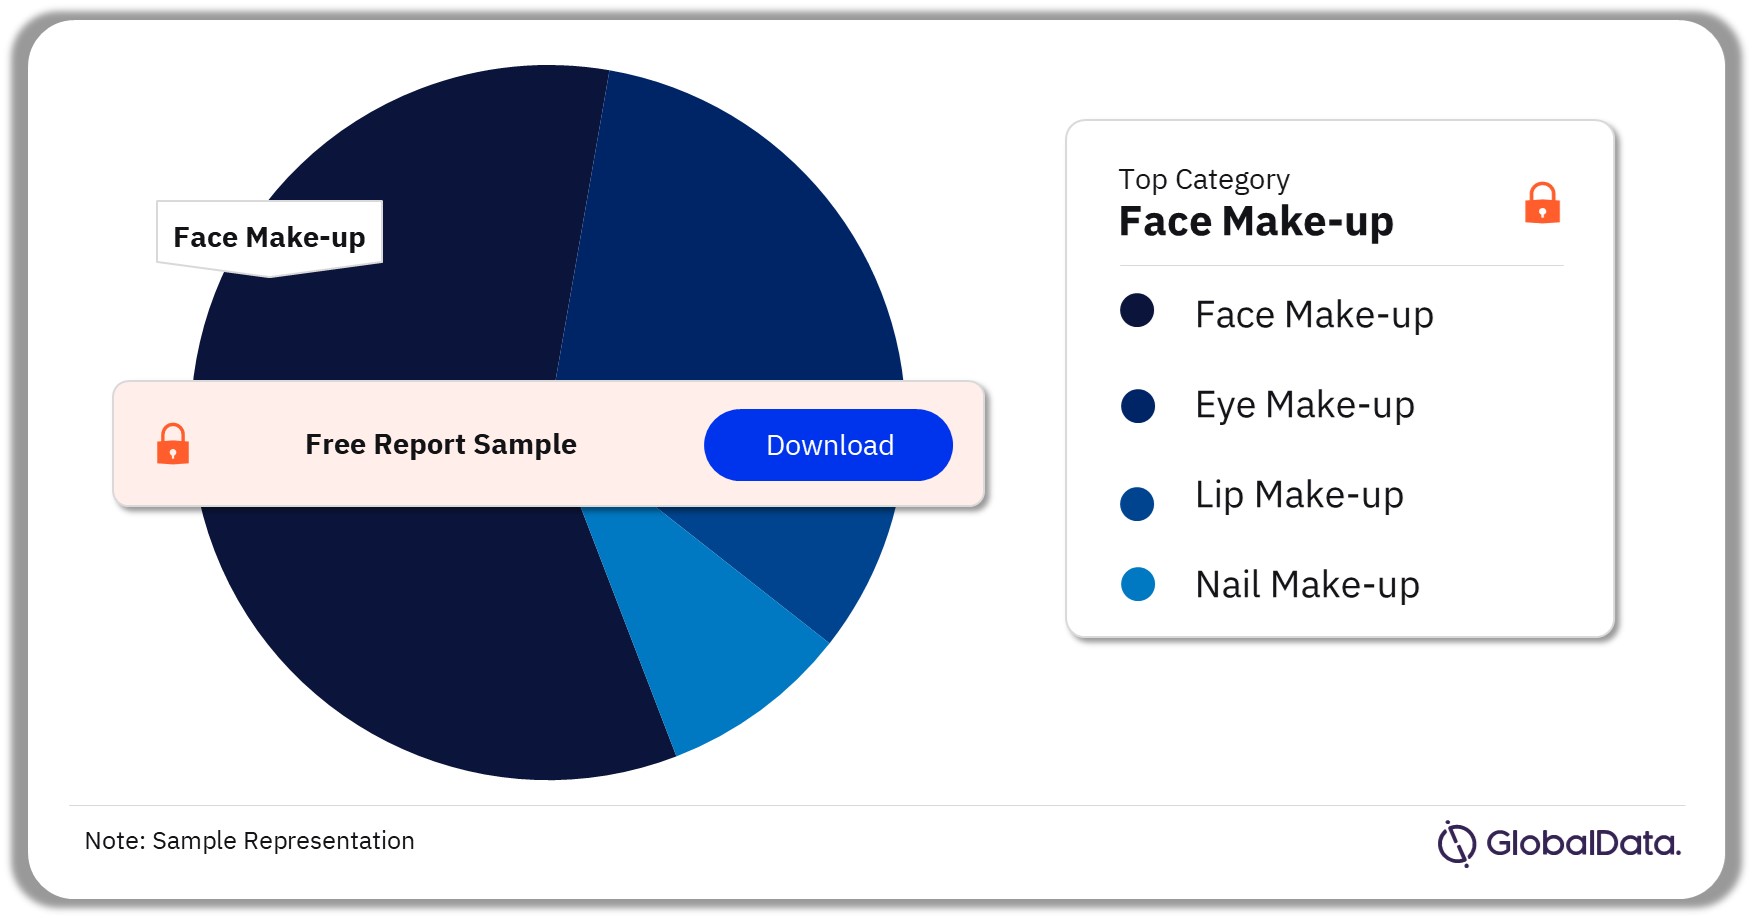 Italy Make-up Market Analysis by Categories, 2021 (%)